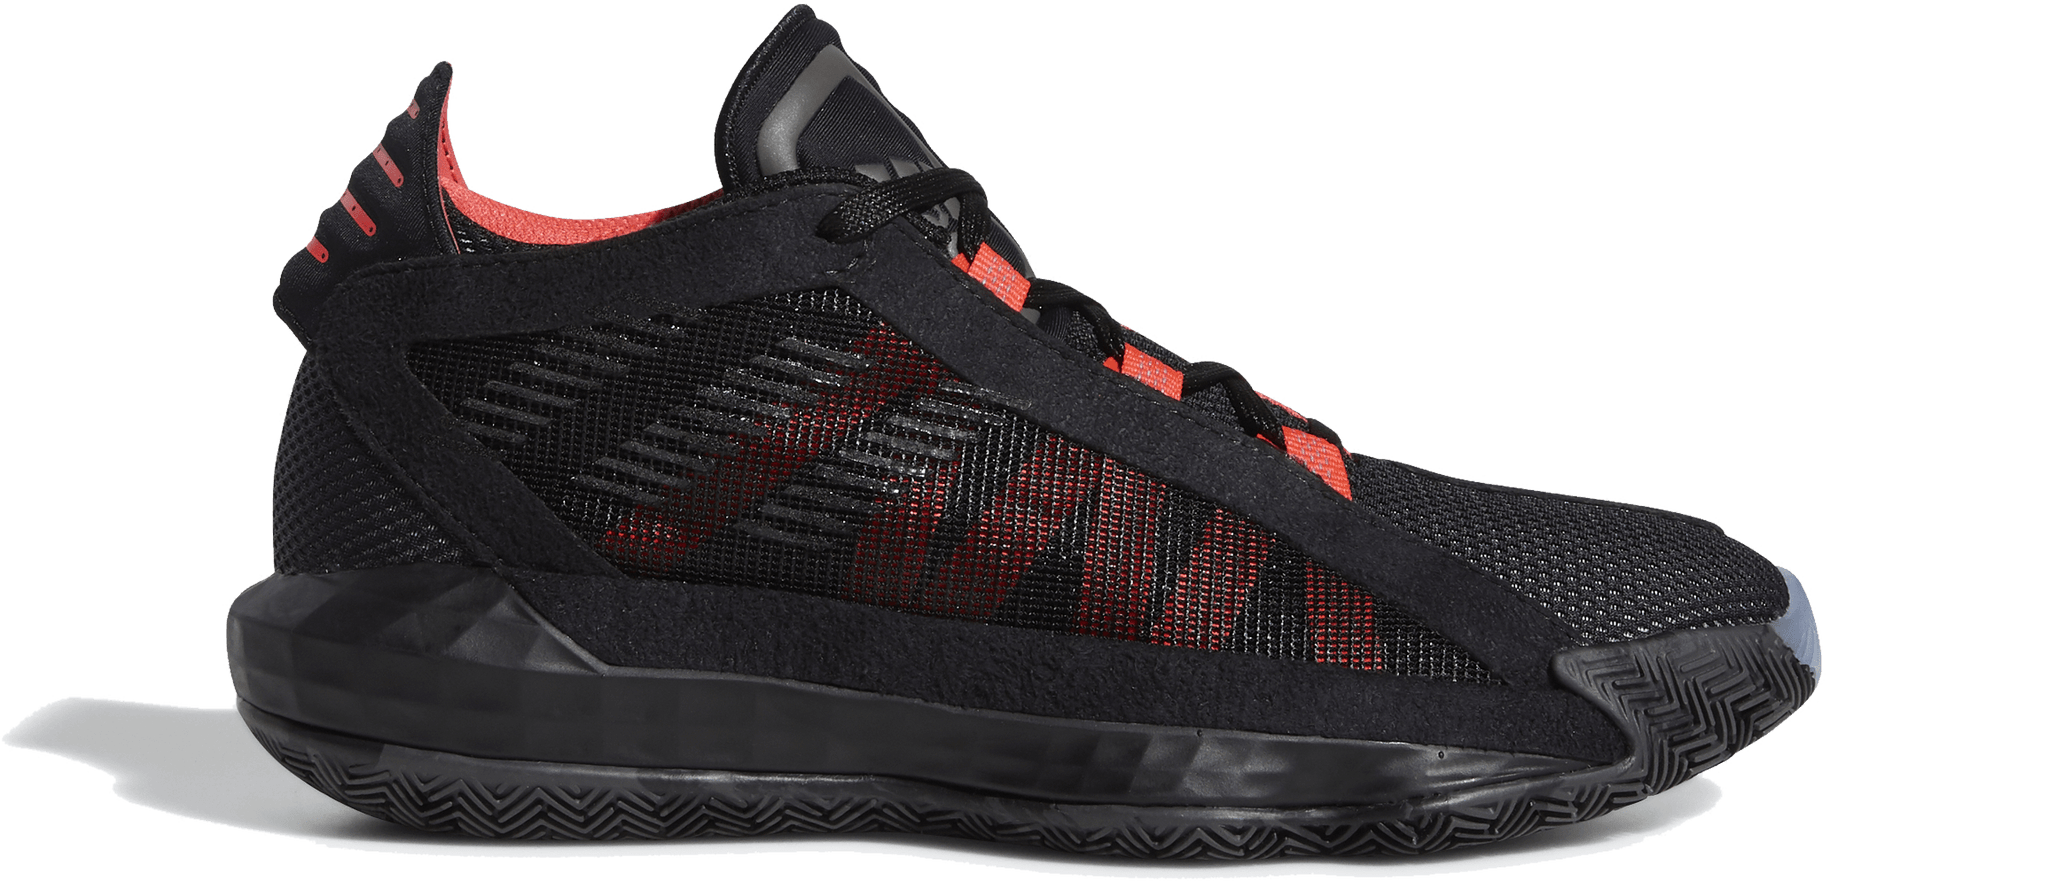 Adidas Dame 6 Performance Review | 7 